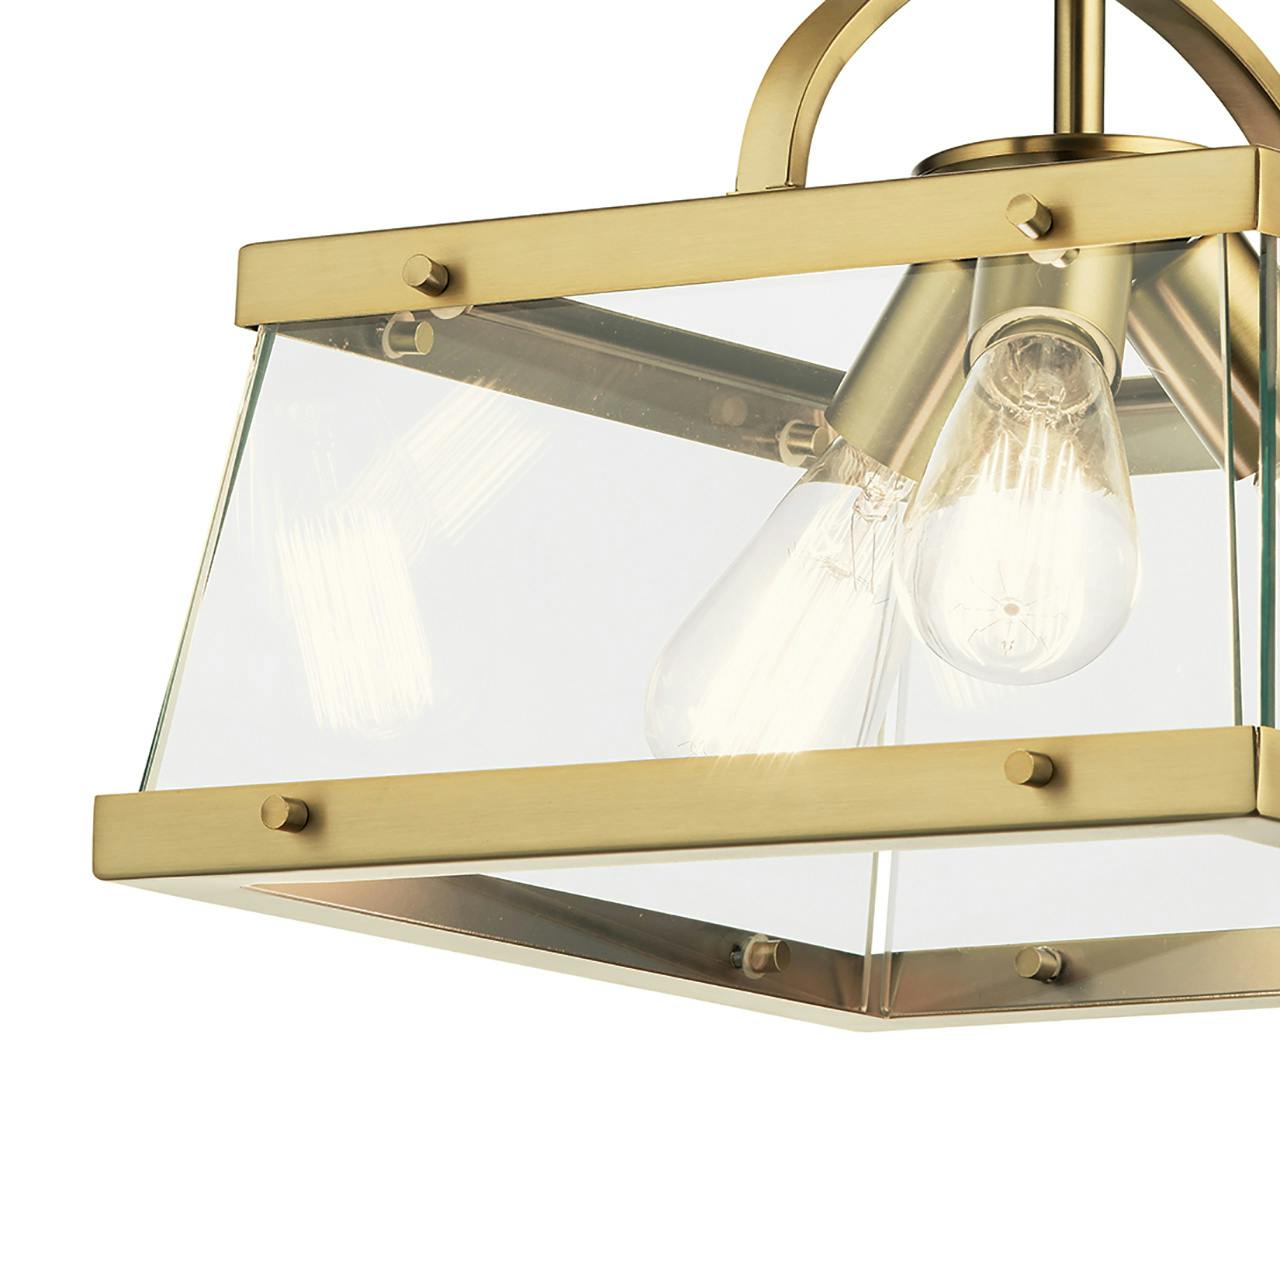 Close up view of the Darton 13.75" Convertible Pendant Brass on a white background